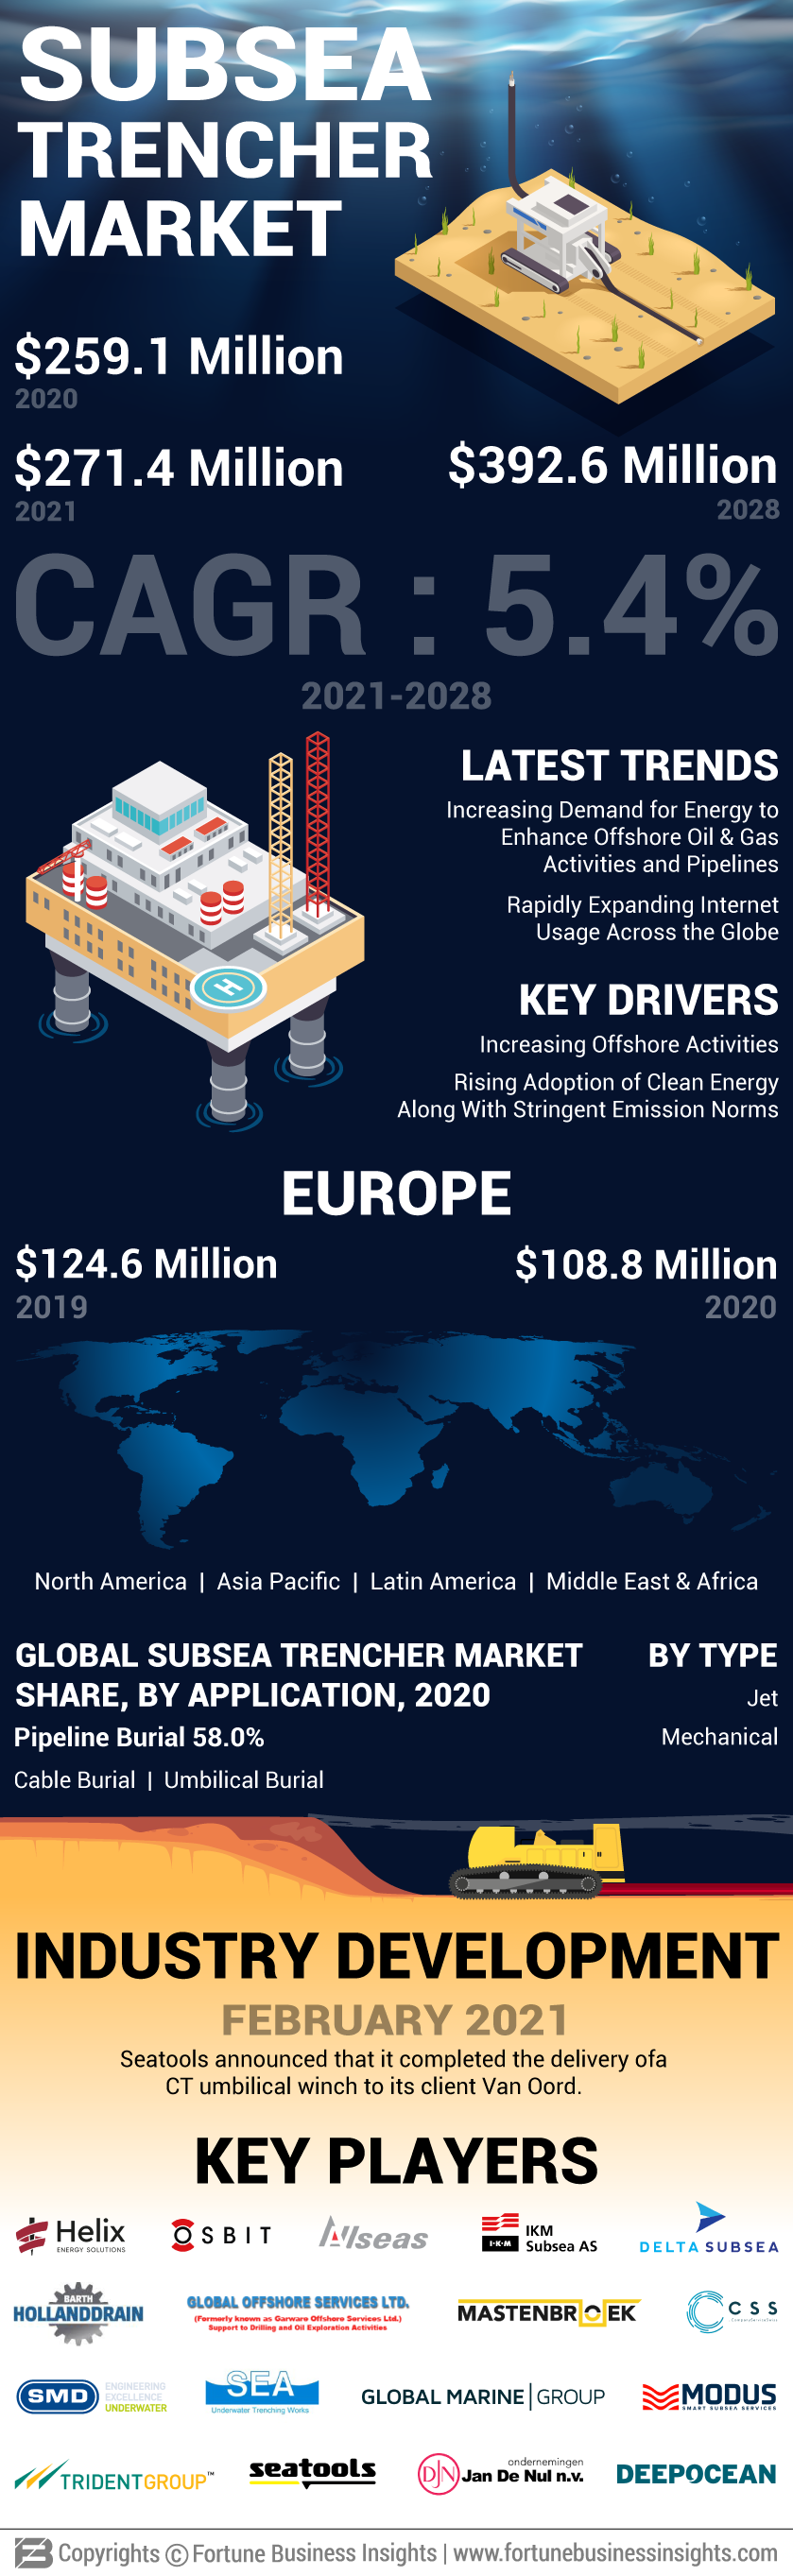 Subsea Trencher Market